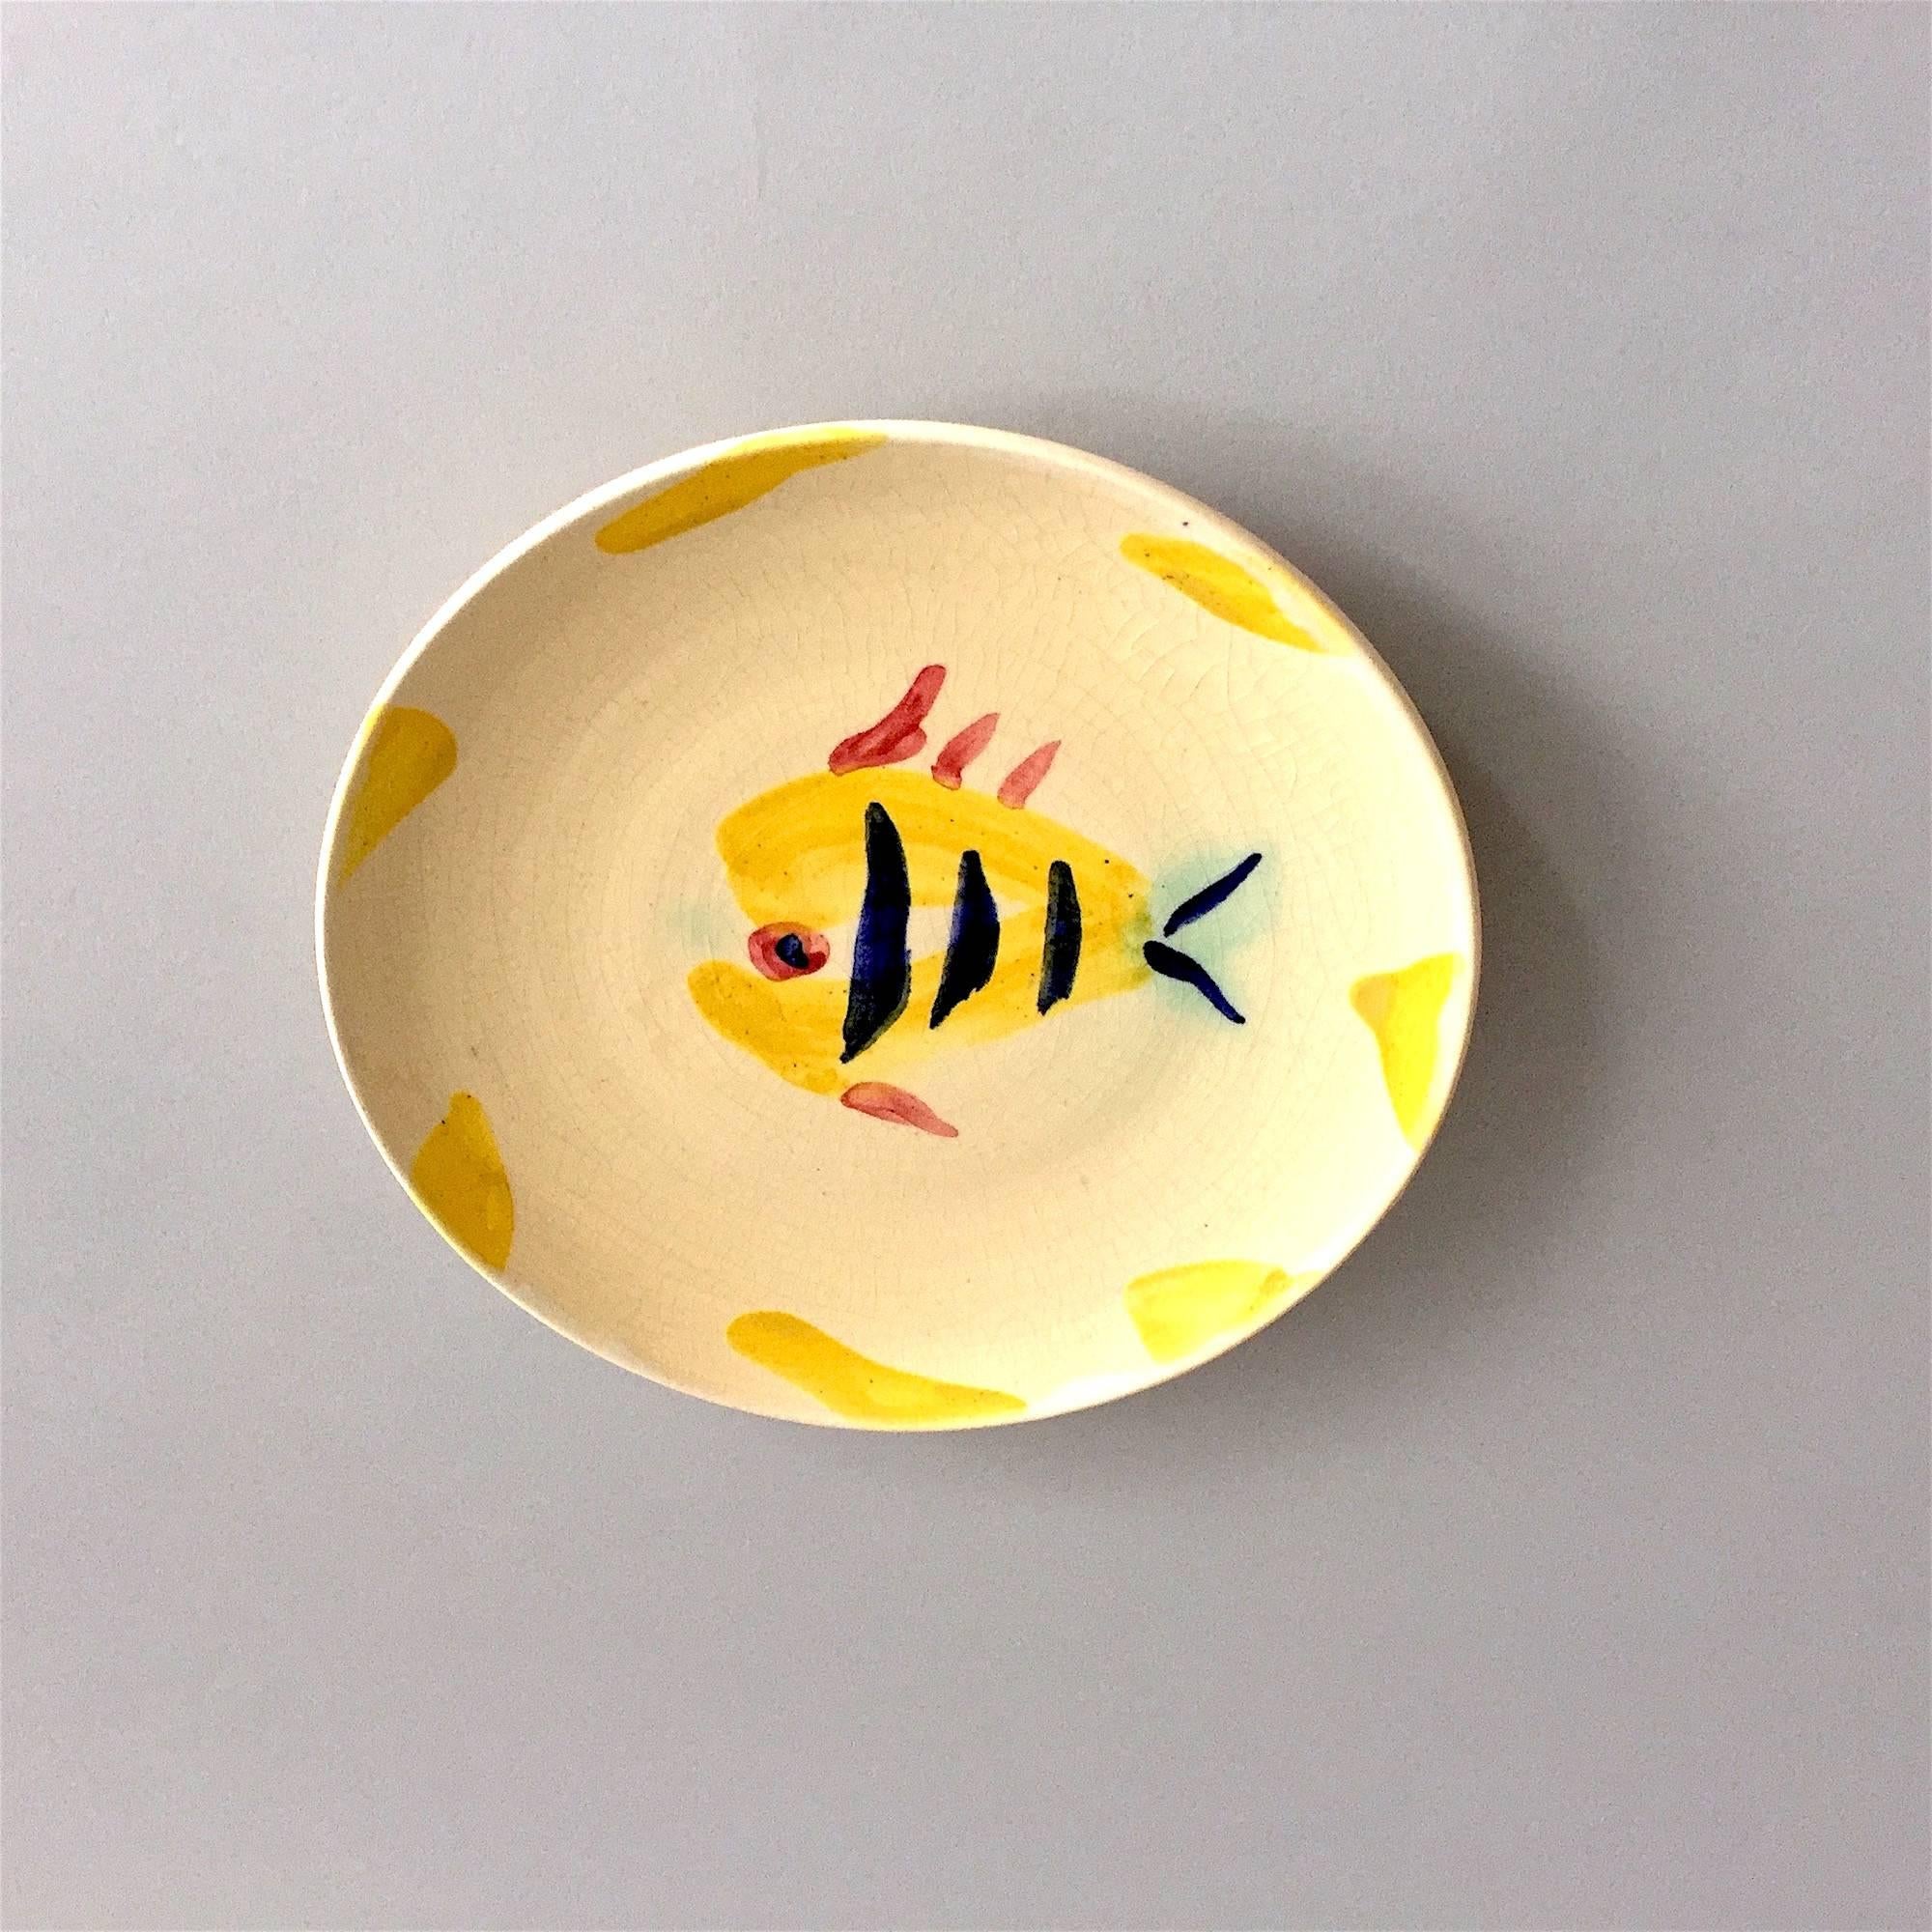 Pablo Picasso.

The fish dish plate or 